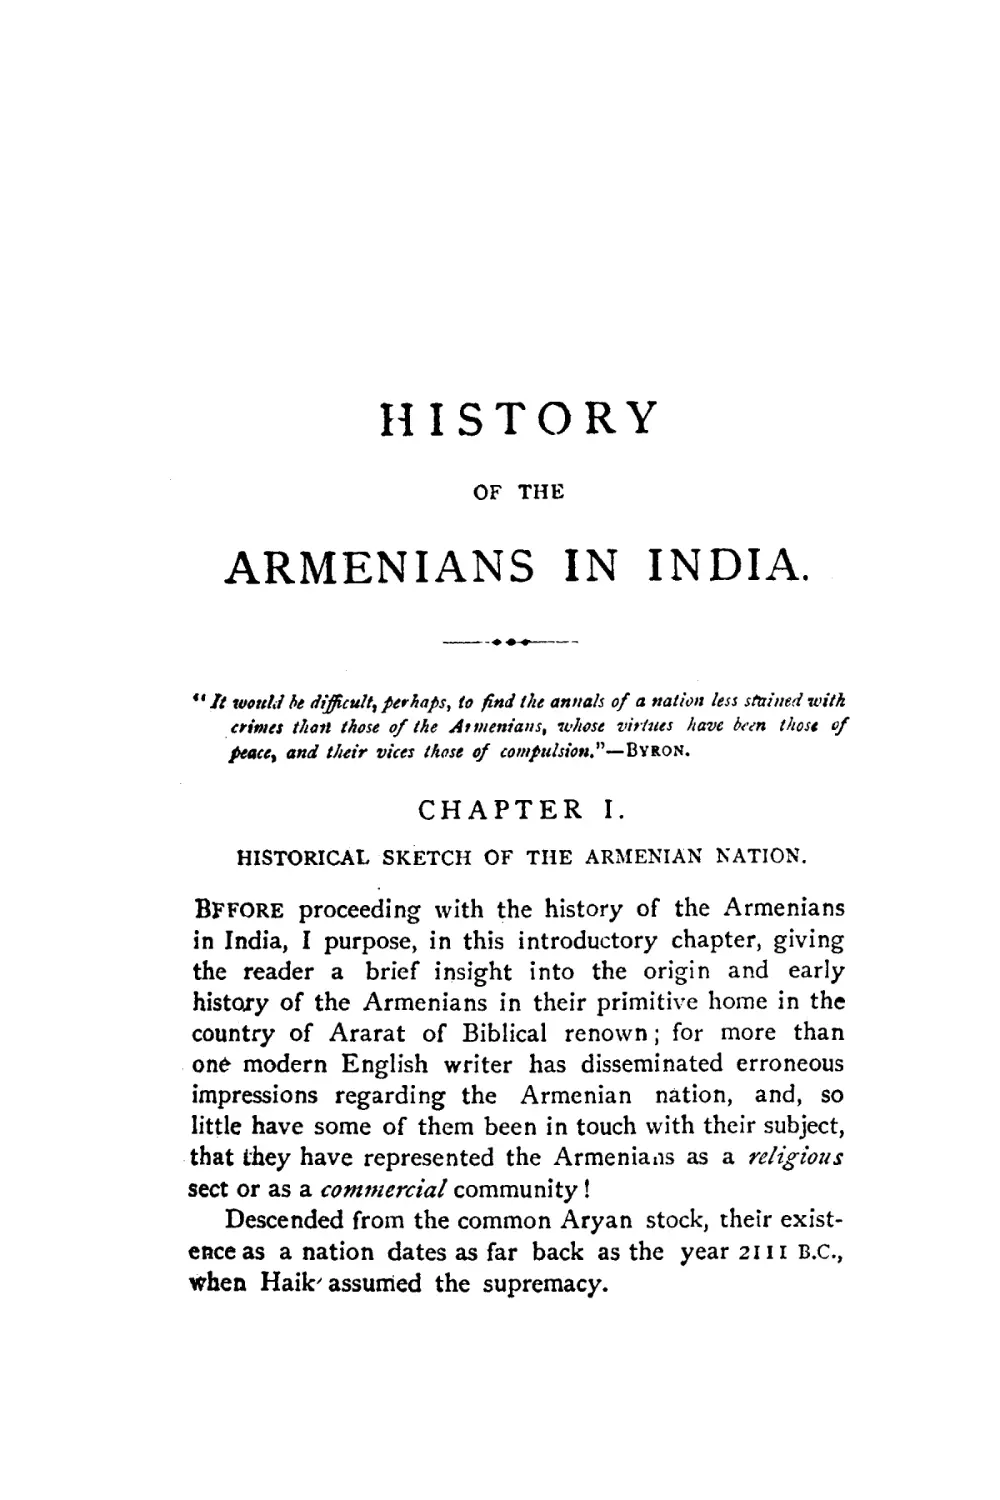 HISTORY OF THE ARMENIANS IN INDIA
CHAPTER I. HISTORICAL SKETCH OF THE ARMENIAN NATION